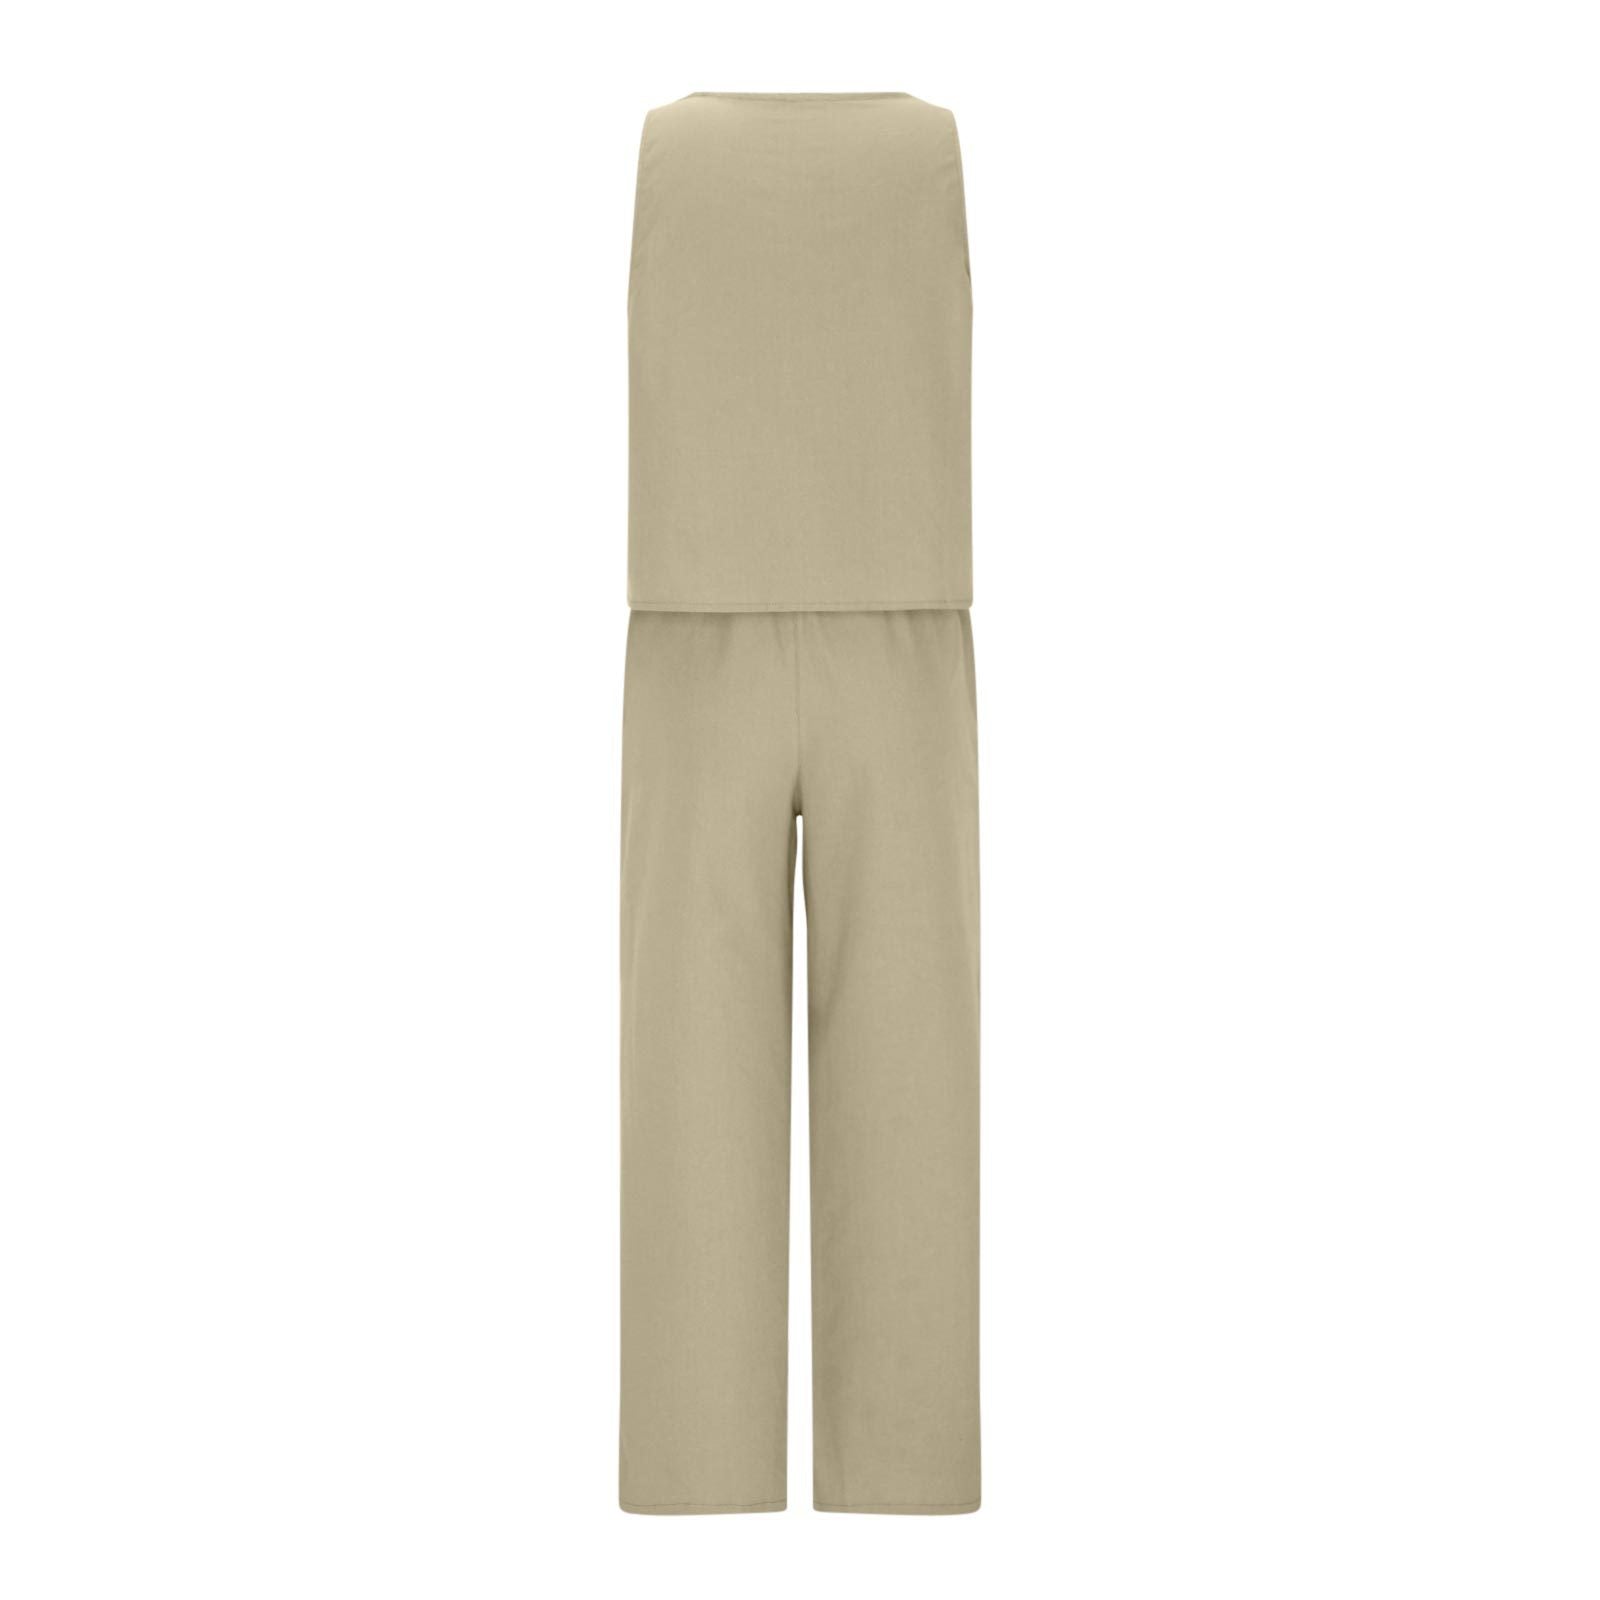 NTG Fad SUIT Sleeveless pocket trousers casual suit